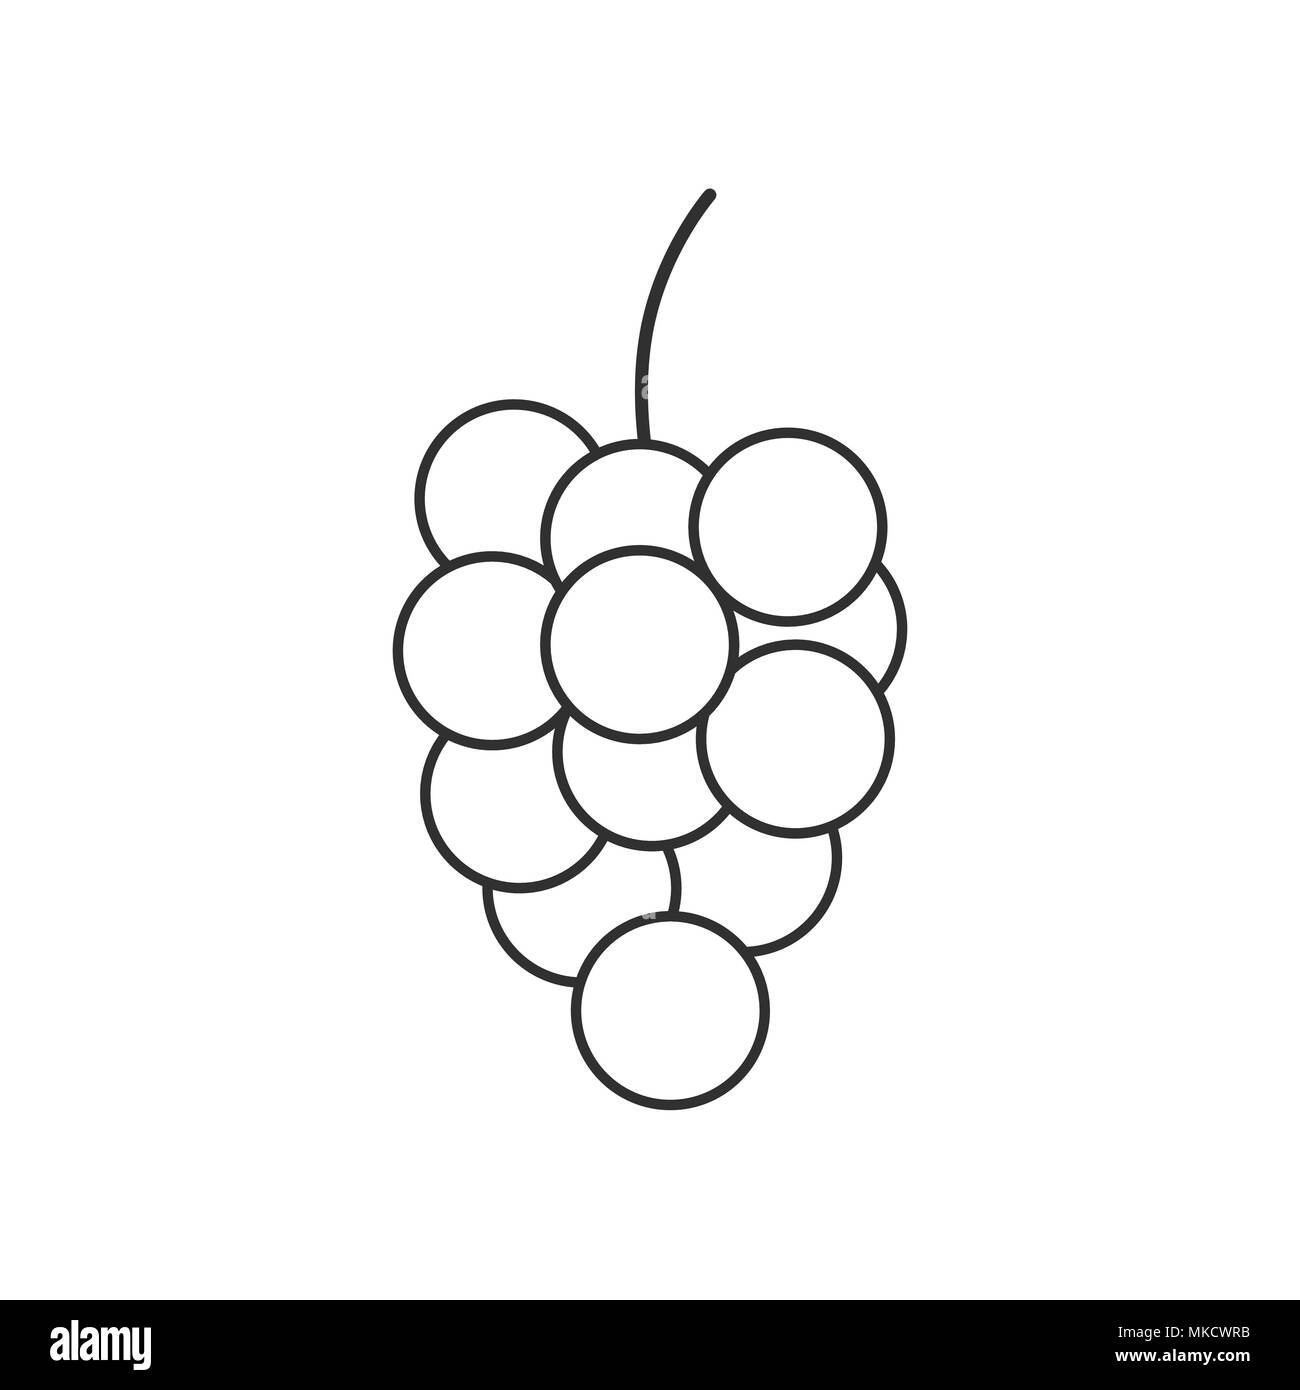 Bunches of grapes icon in black flat outline design. Stock Vector